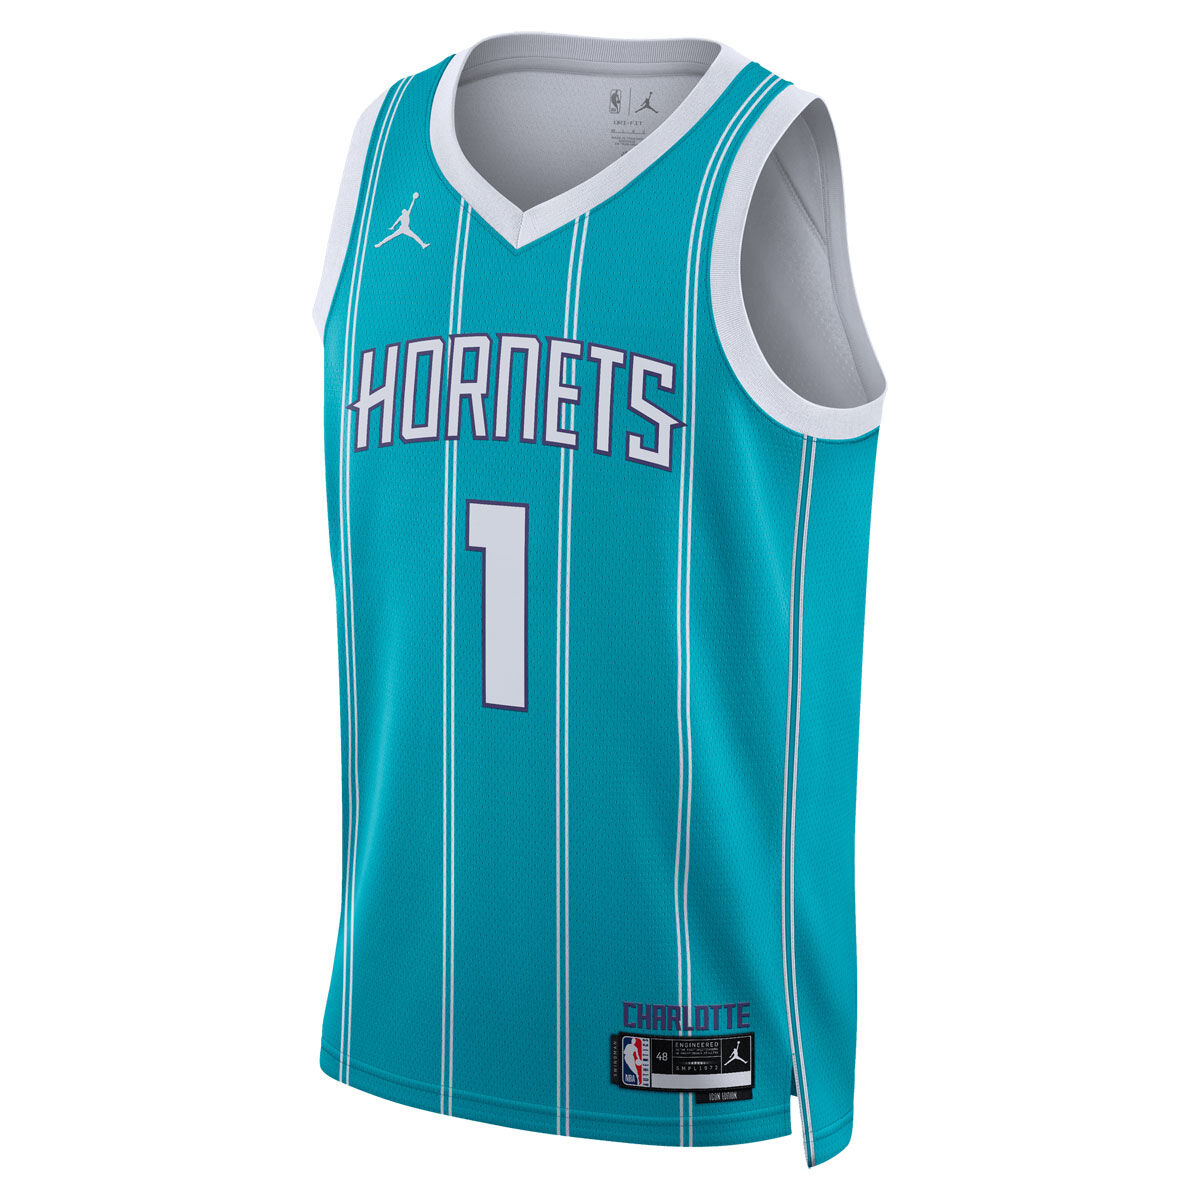 Fanatics Branded Charlotte Hornets Gear, Fanatics Branded Hornets Store,  Fanatics Branded Originals and More